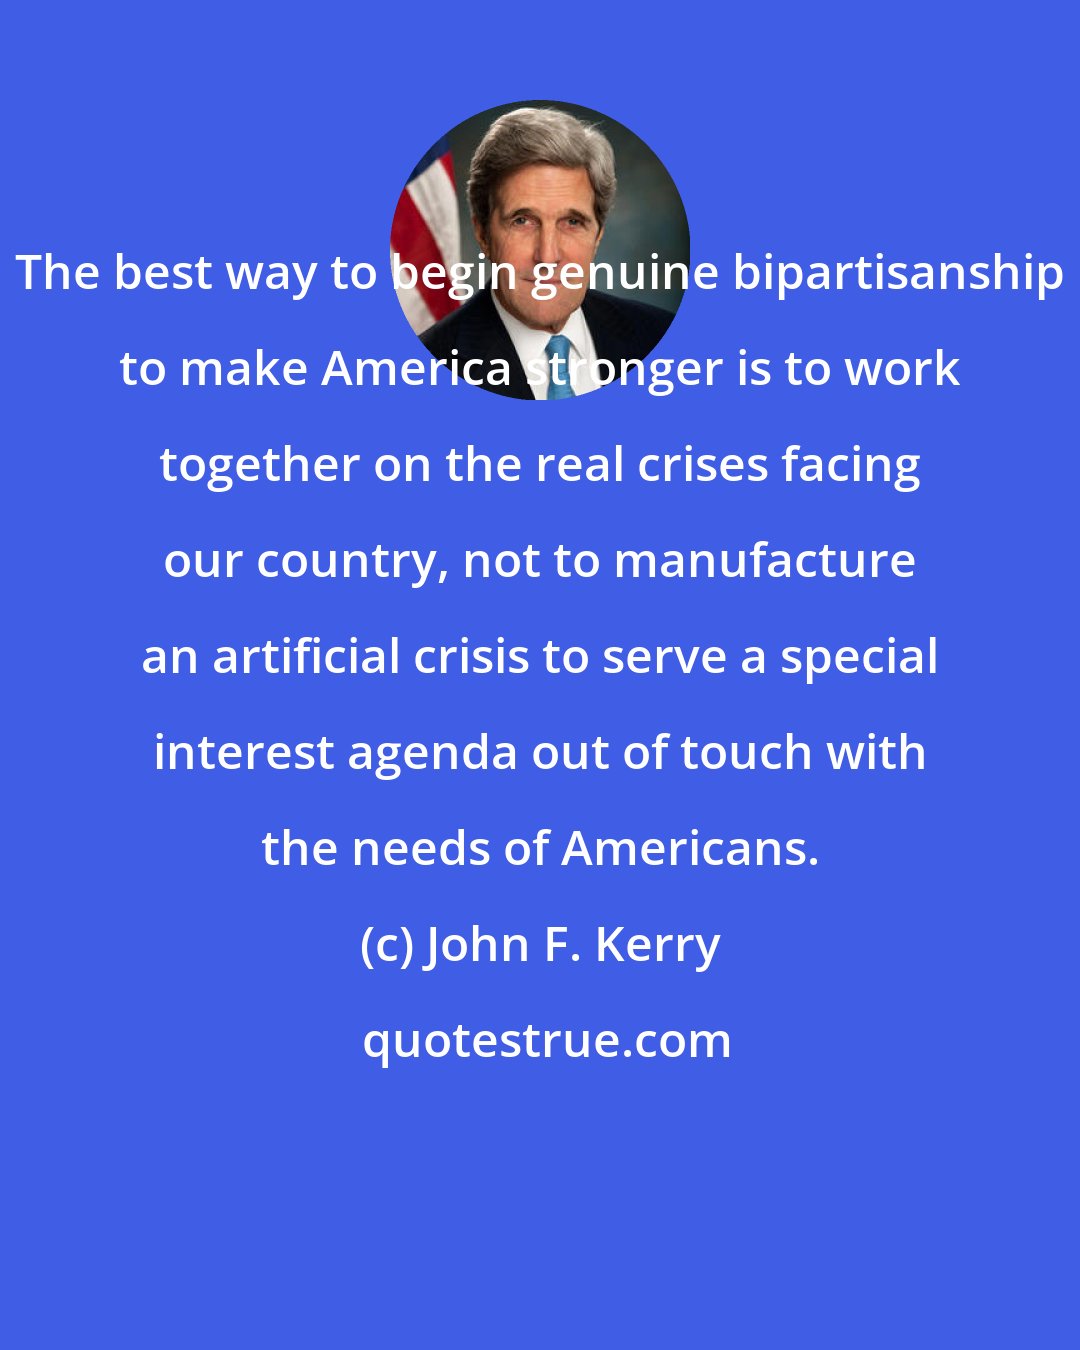 John F. Kerry: The best way to begin genuine bipartisanship to make America stronger is to work together on the real crises facing our country, not to manufacture an artificial crisis to serve a special interest agenda out of touch with the needs of Americans.